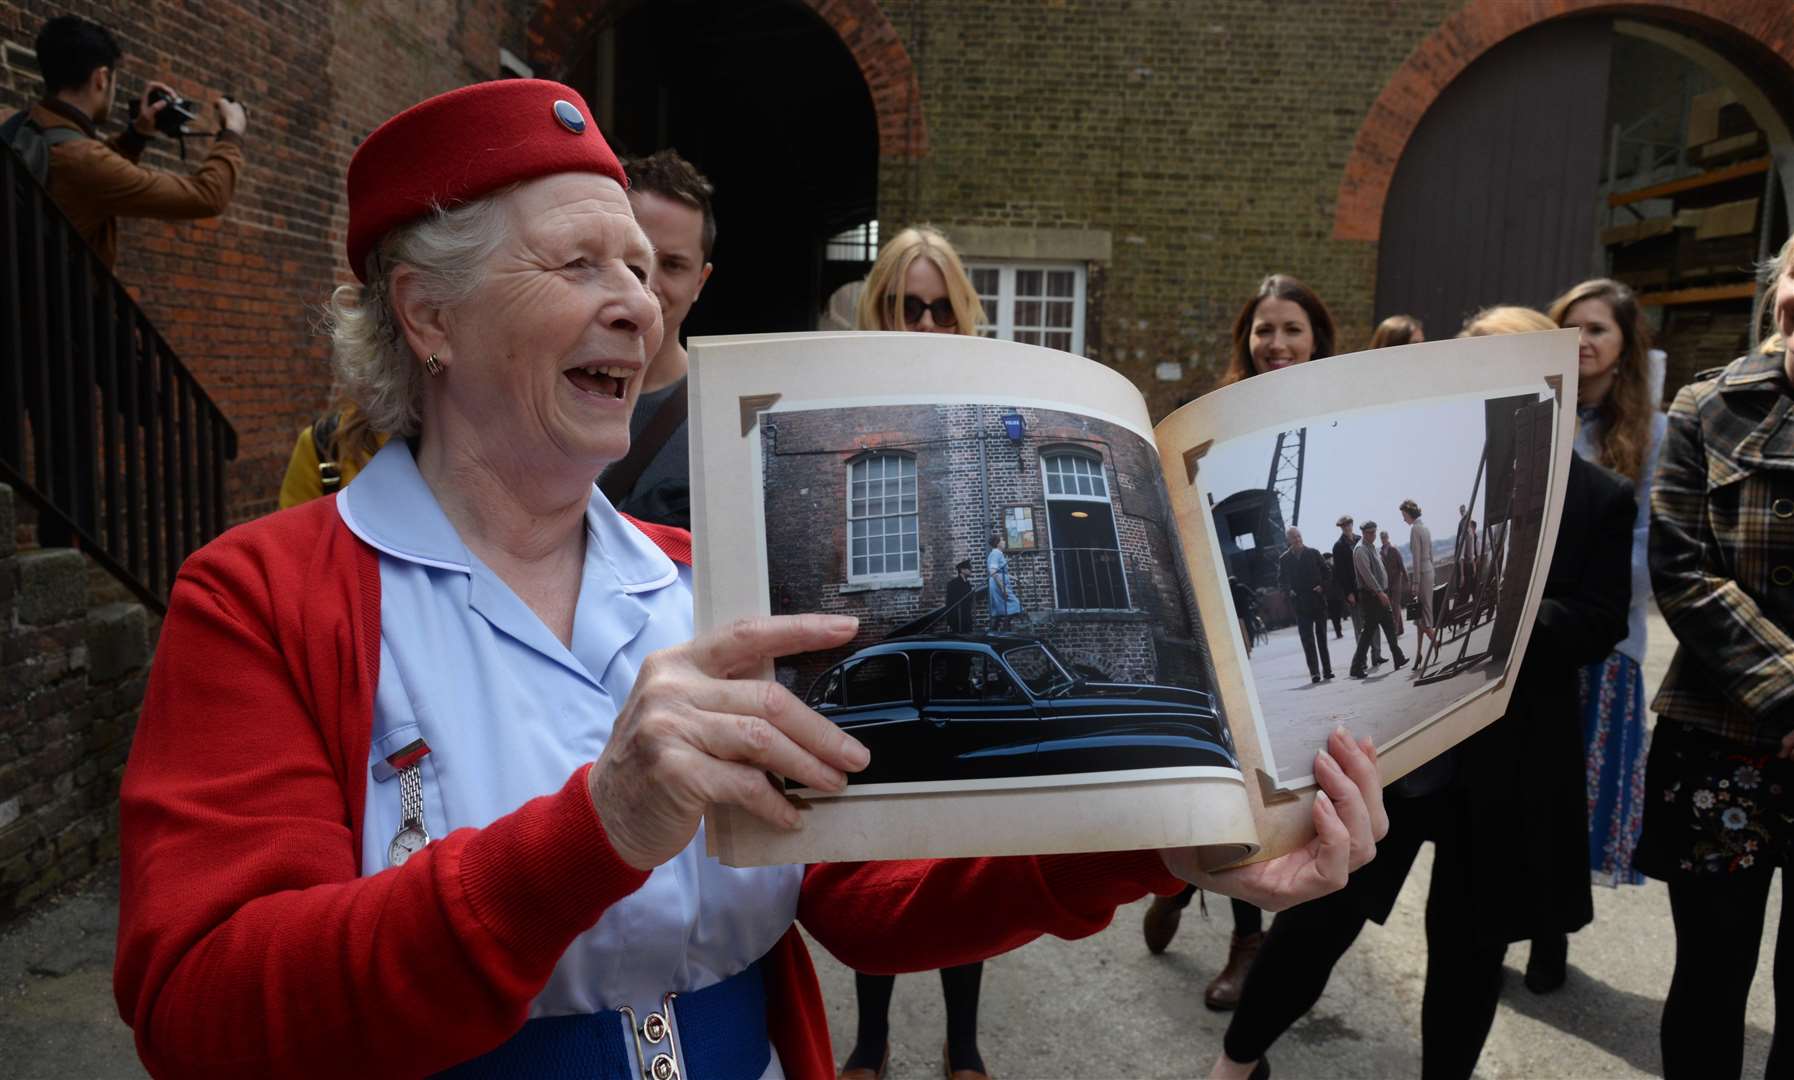 Call the Midwife tours are back. Tour guide Irene Addley shows people what's on offer Picture: Chris Davey